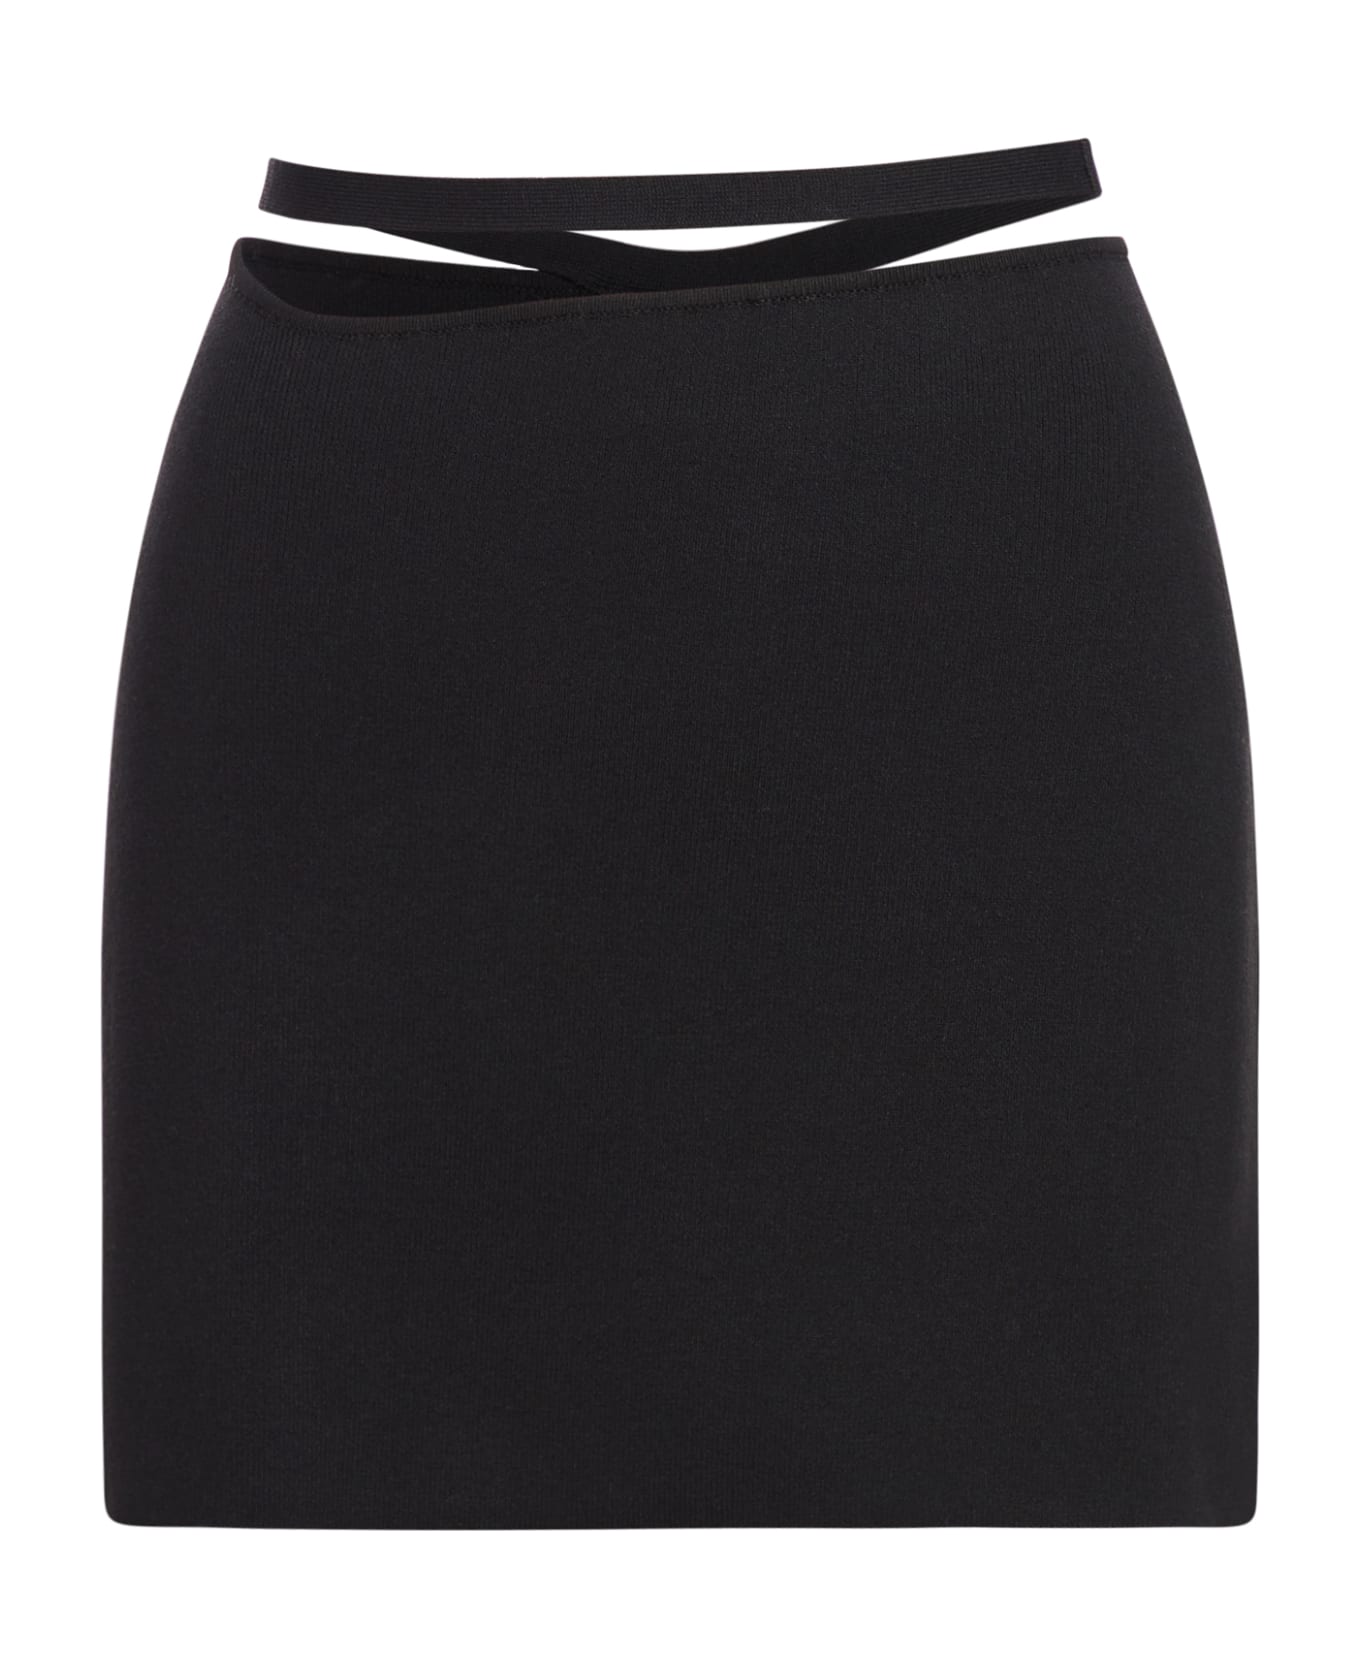 ANDREĀDAMO Stretch Knit Mini Skirt With Cut-out Bel - Black